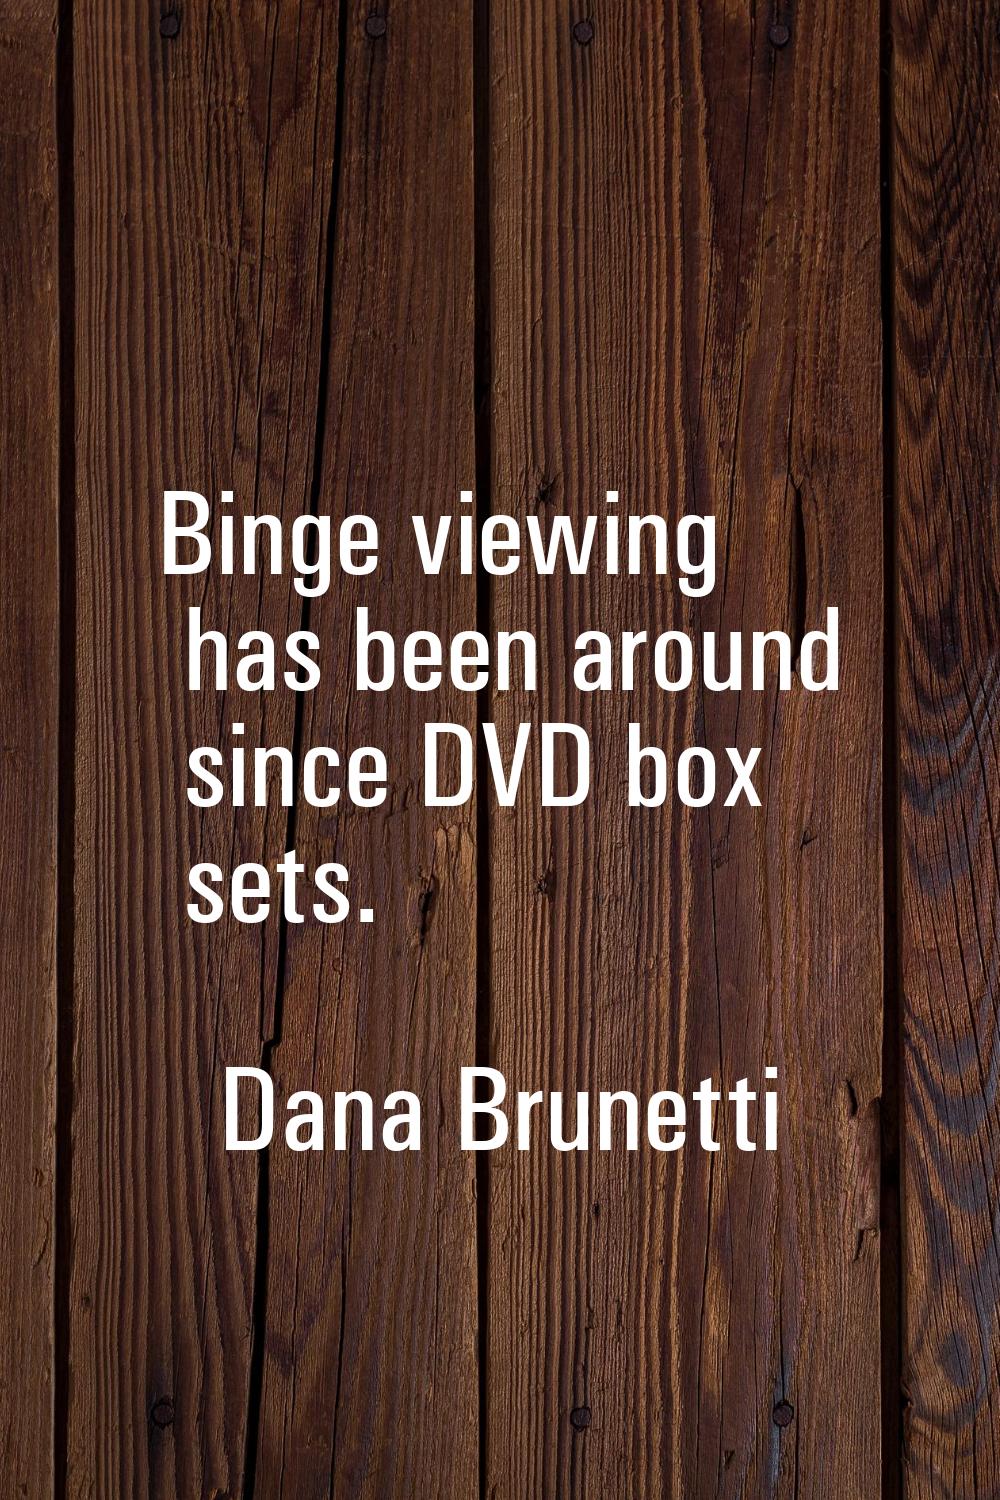 Binge viewing has been around since DVD box sets.